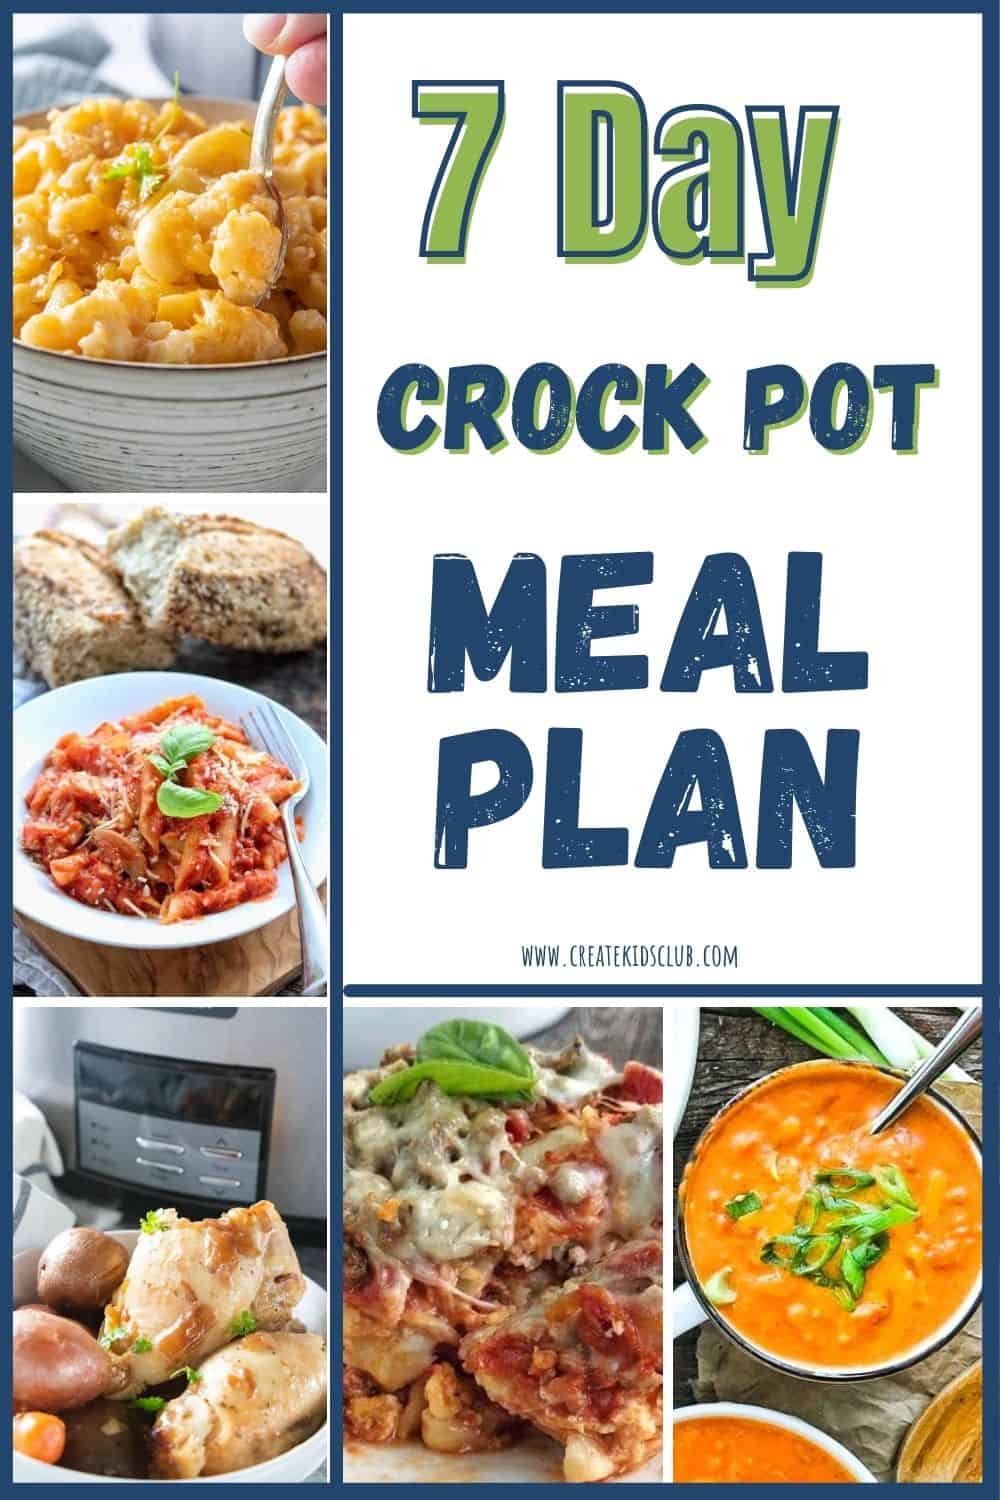 5 pictures of crock pot meals for a week of crockpot meals roundup.